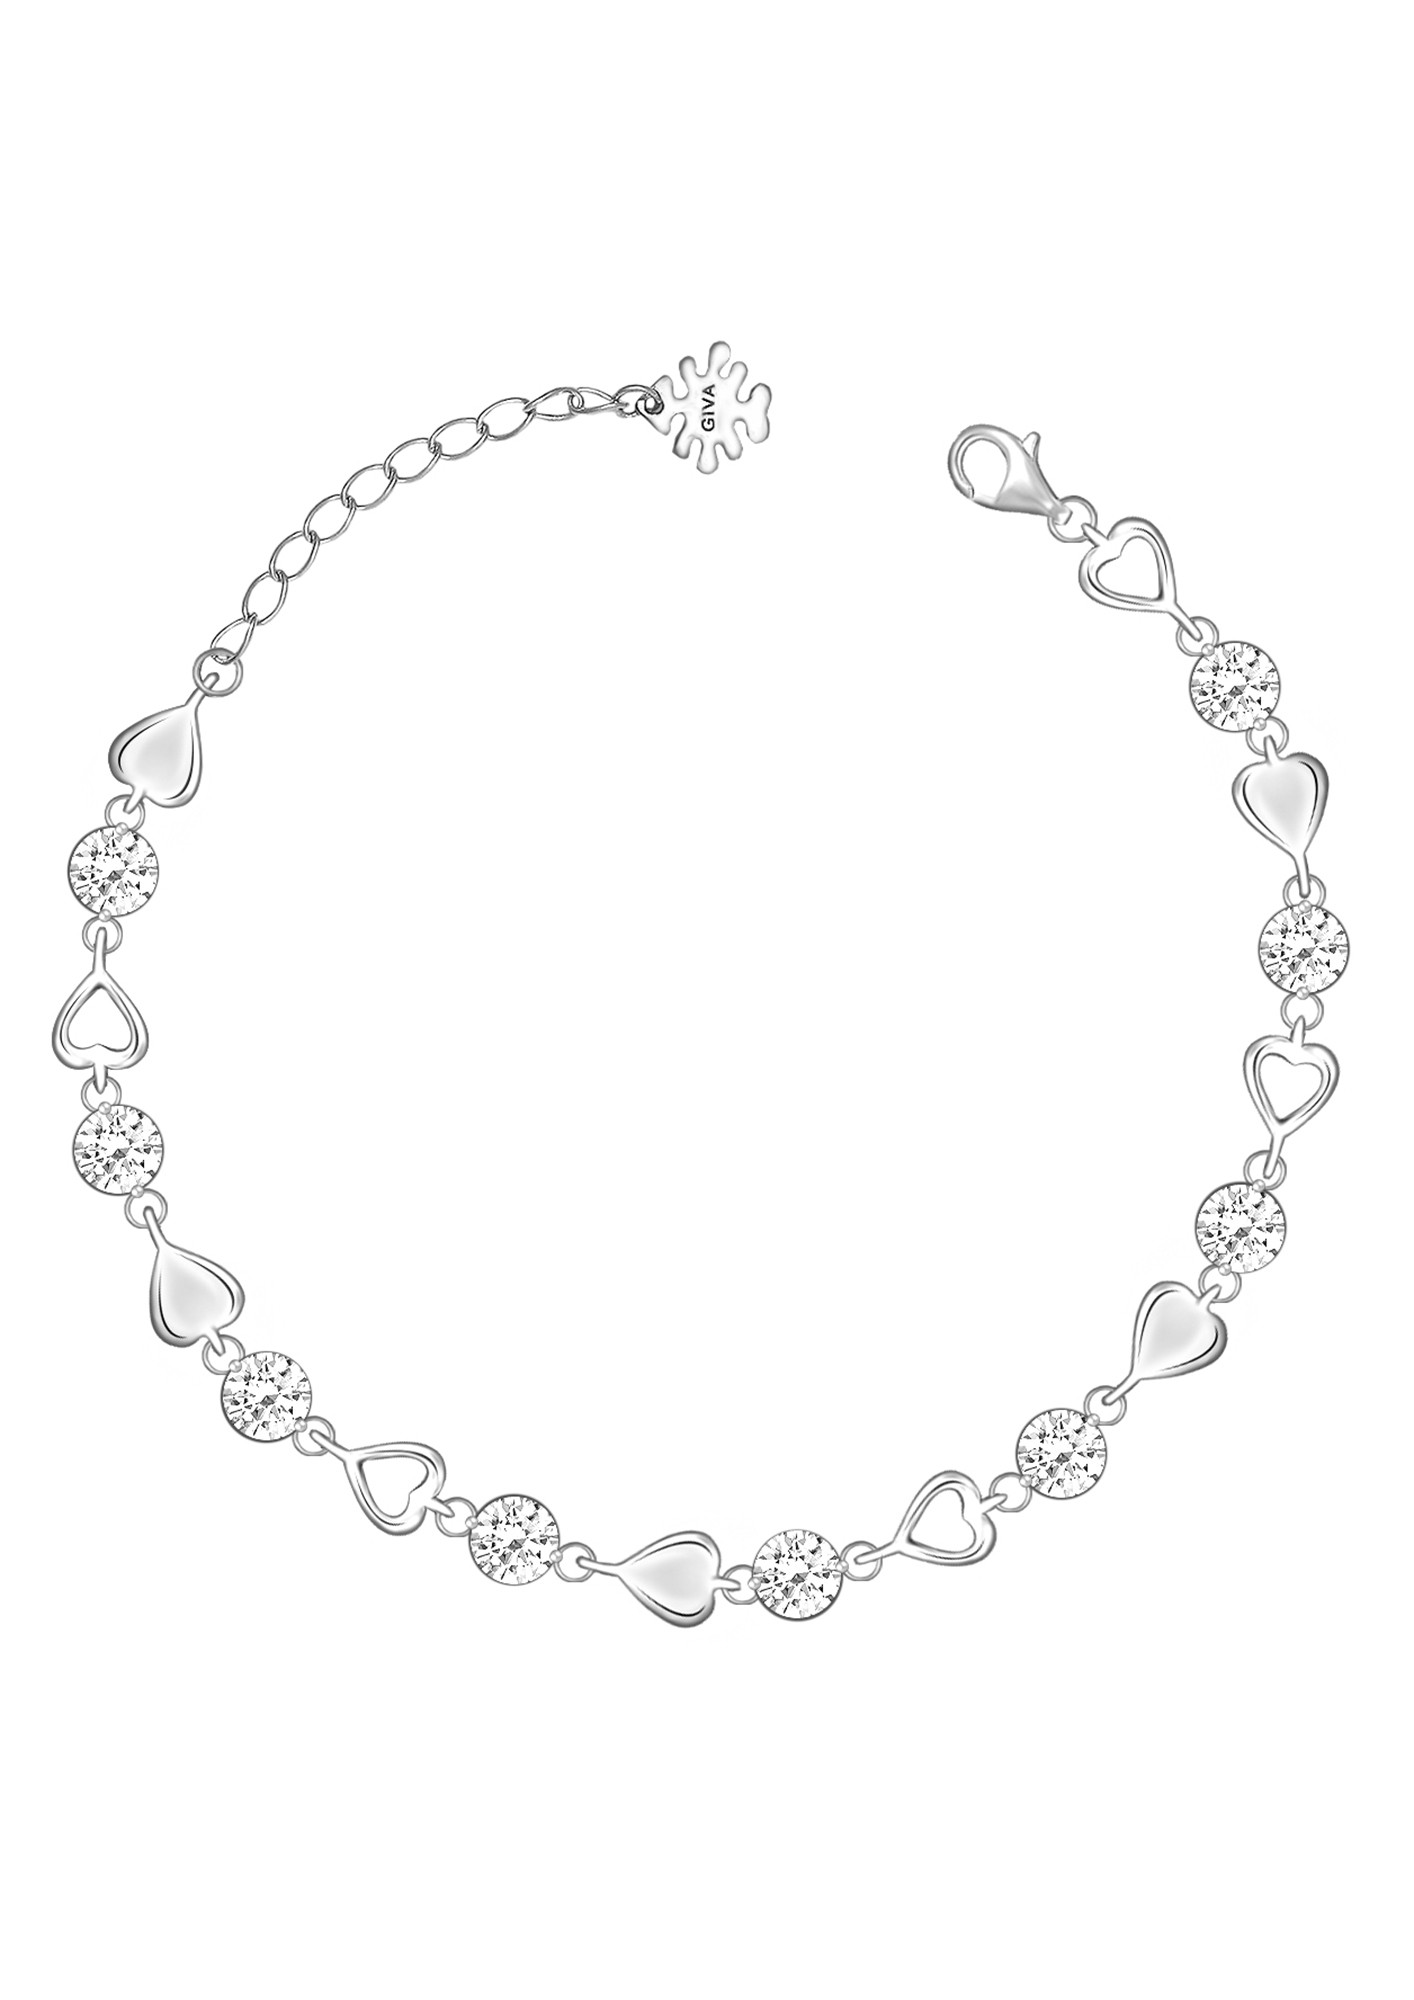 GIVA 925 Sterling Silver Interlocked Heart Duo Bracelet | Gifts for  Girlfriend, Gifts for Women & Girls| With Certificate of Authenticity and  925 Stamp | 6 Month Warranty* : Amazon.in: Jewellery